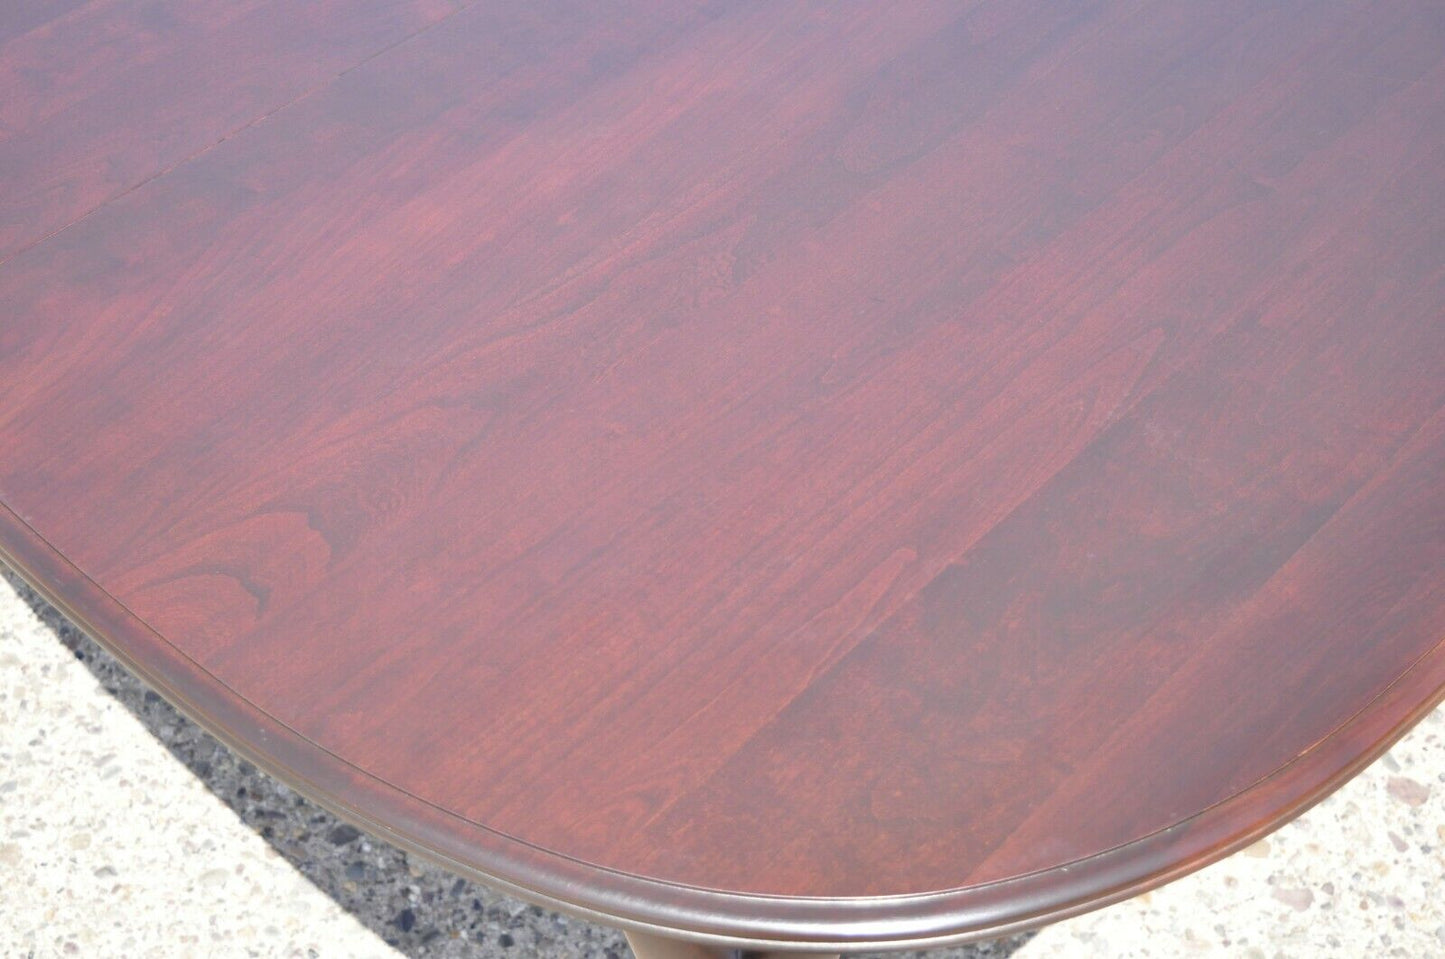 Ethan Allen Georgian Court Cherry Wood Queen Anne Oval Dining Table 1 Leaf